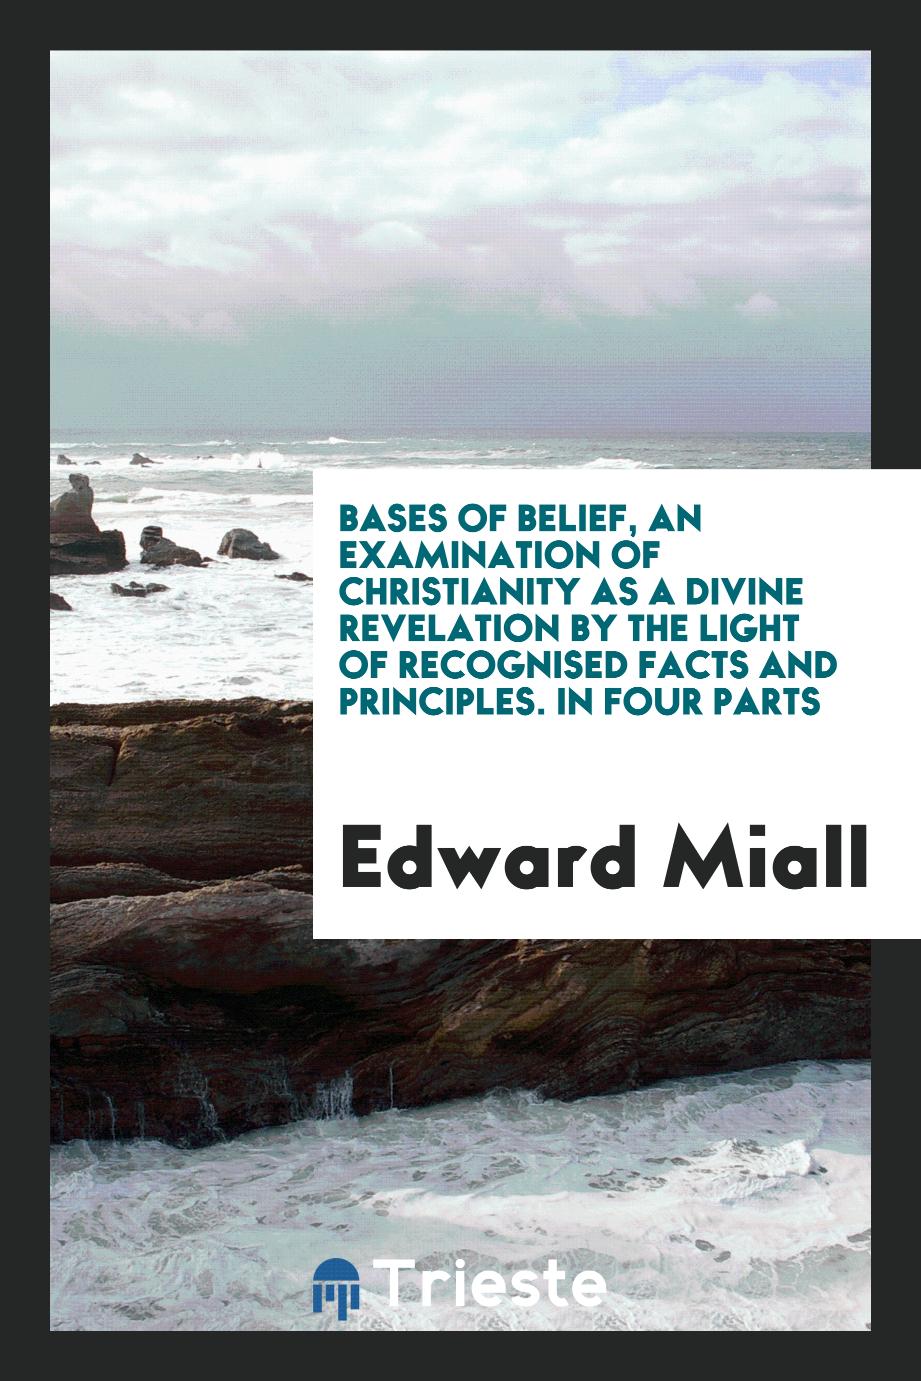 Bases of belief, an examination of Christianity as a divine revelation by the light of recognised facts and principles. In four parts